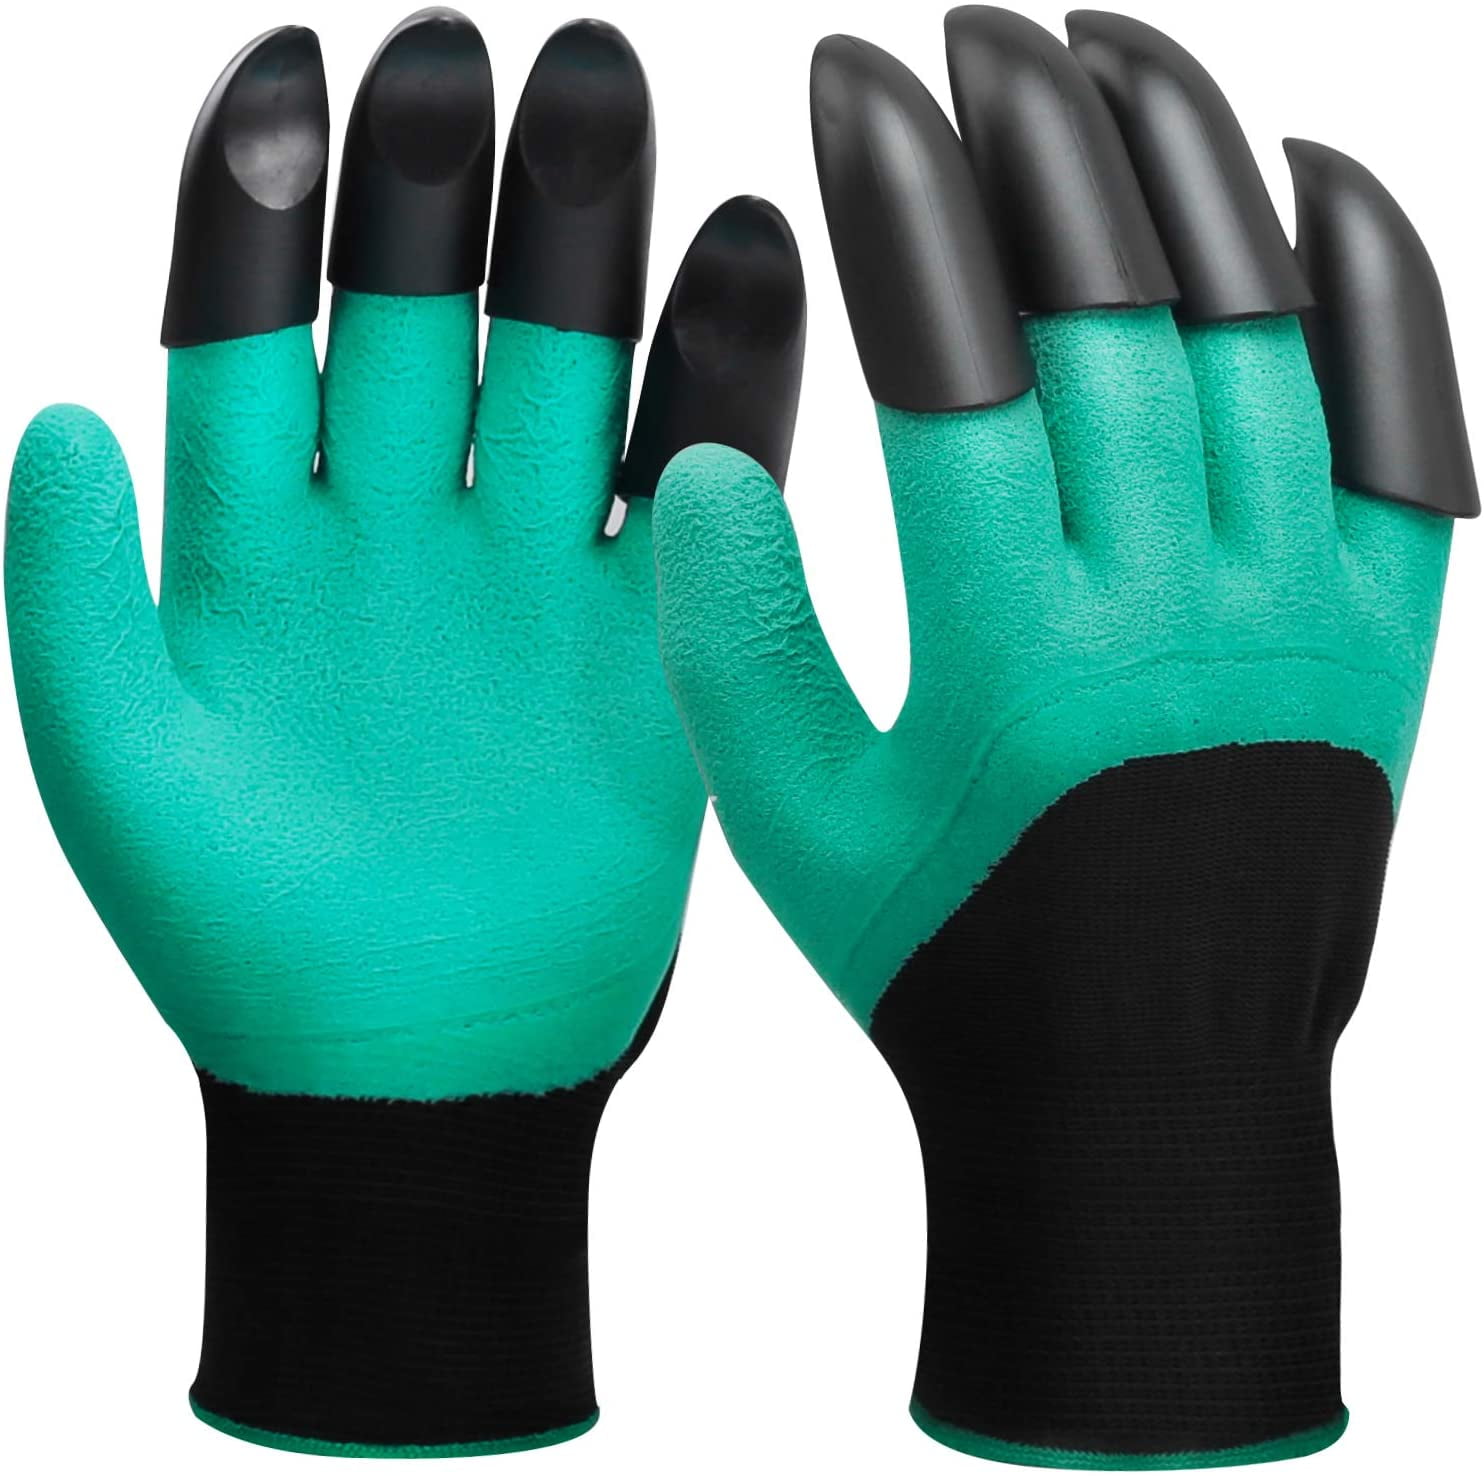 10 x Rubber Digging Glove Built In Plastic Claws Waterproof Gardening Planting 